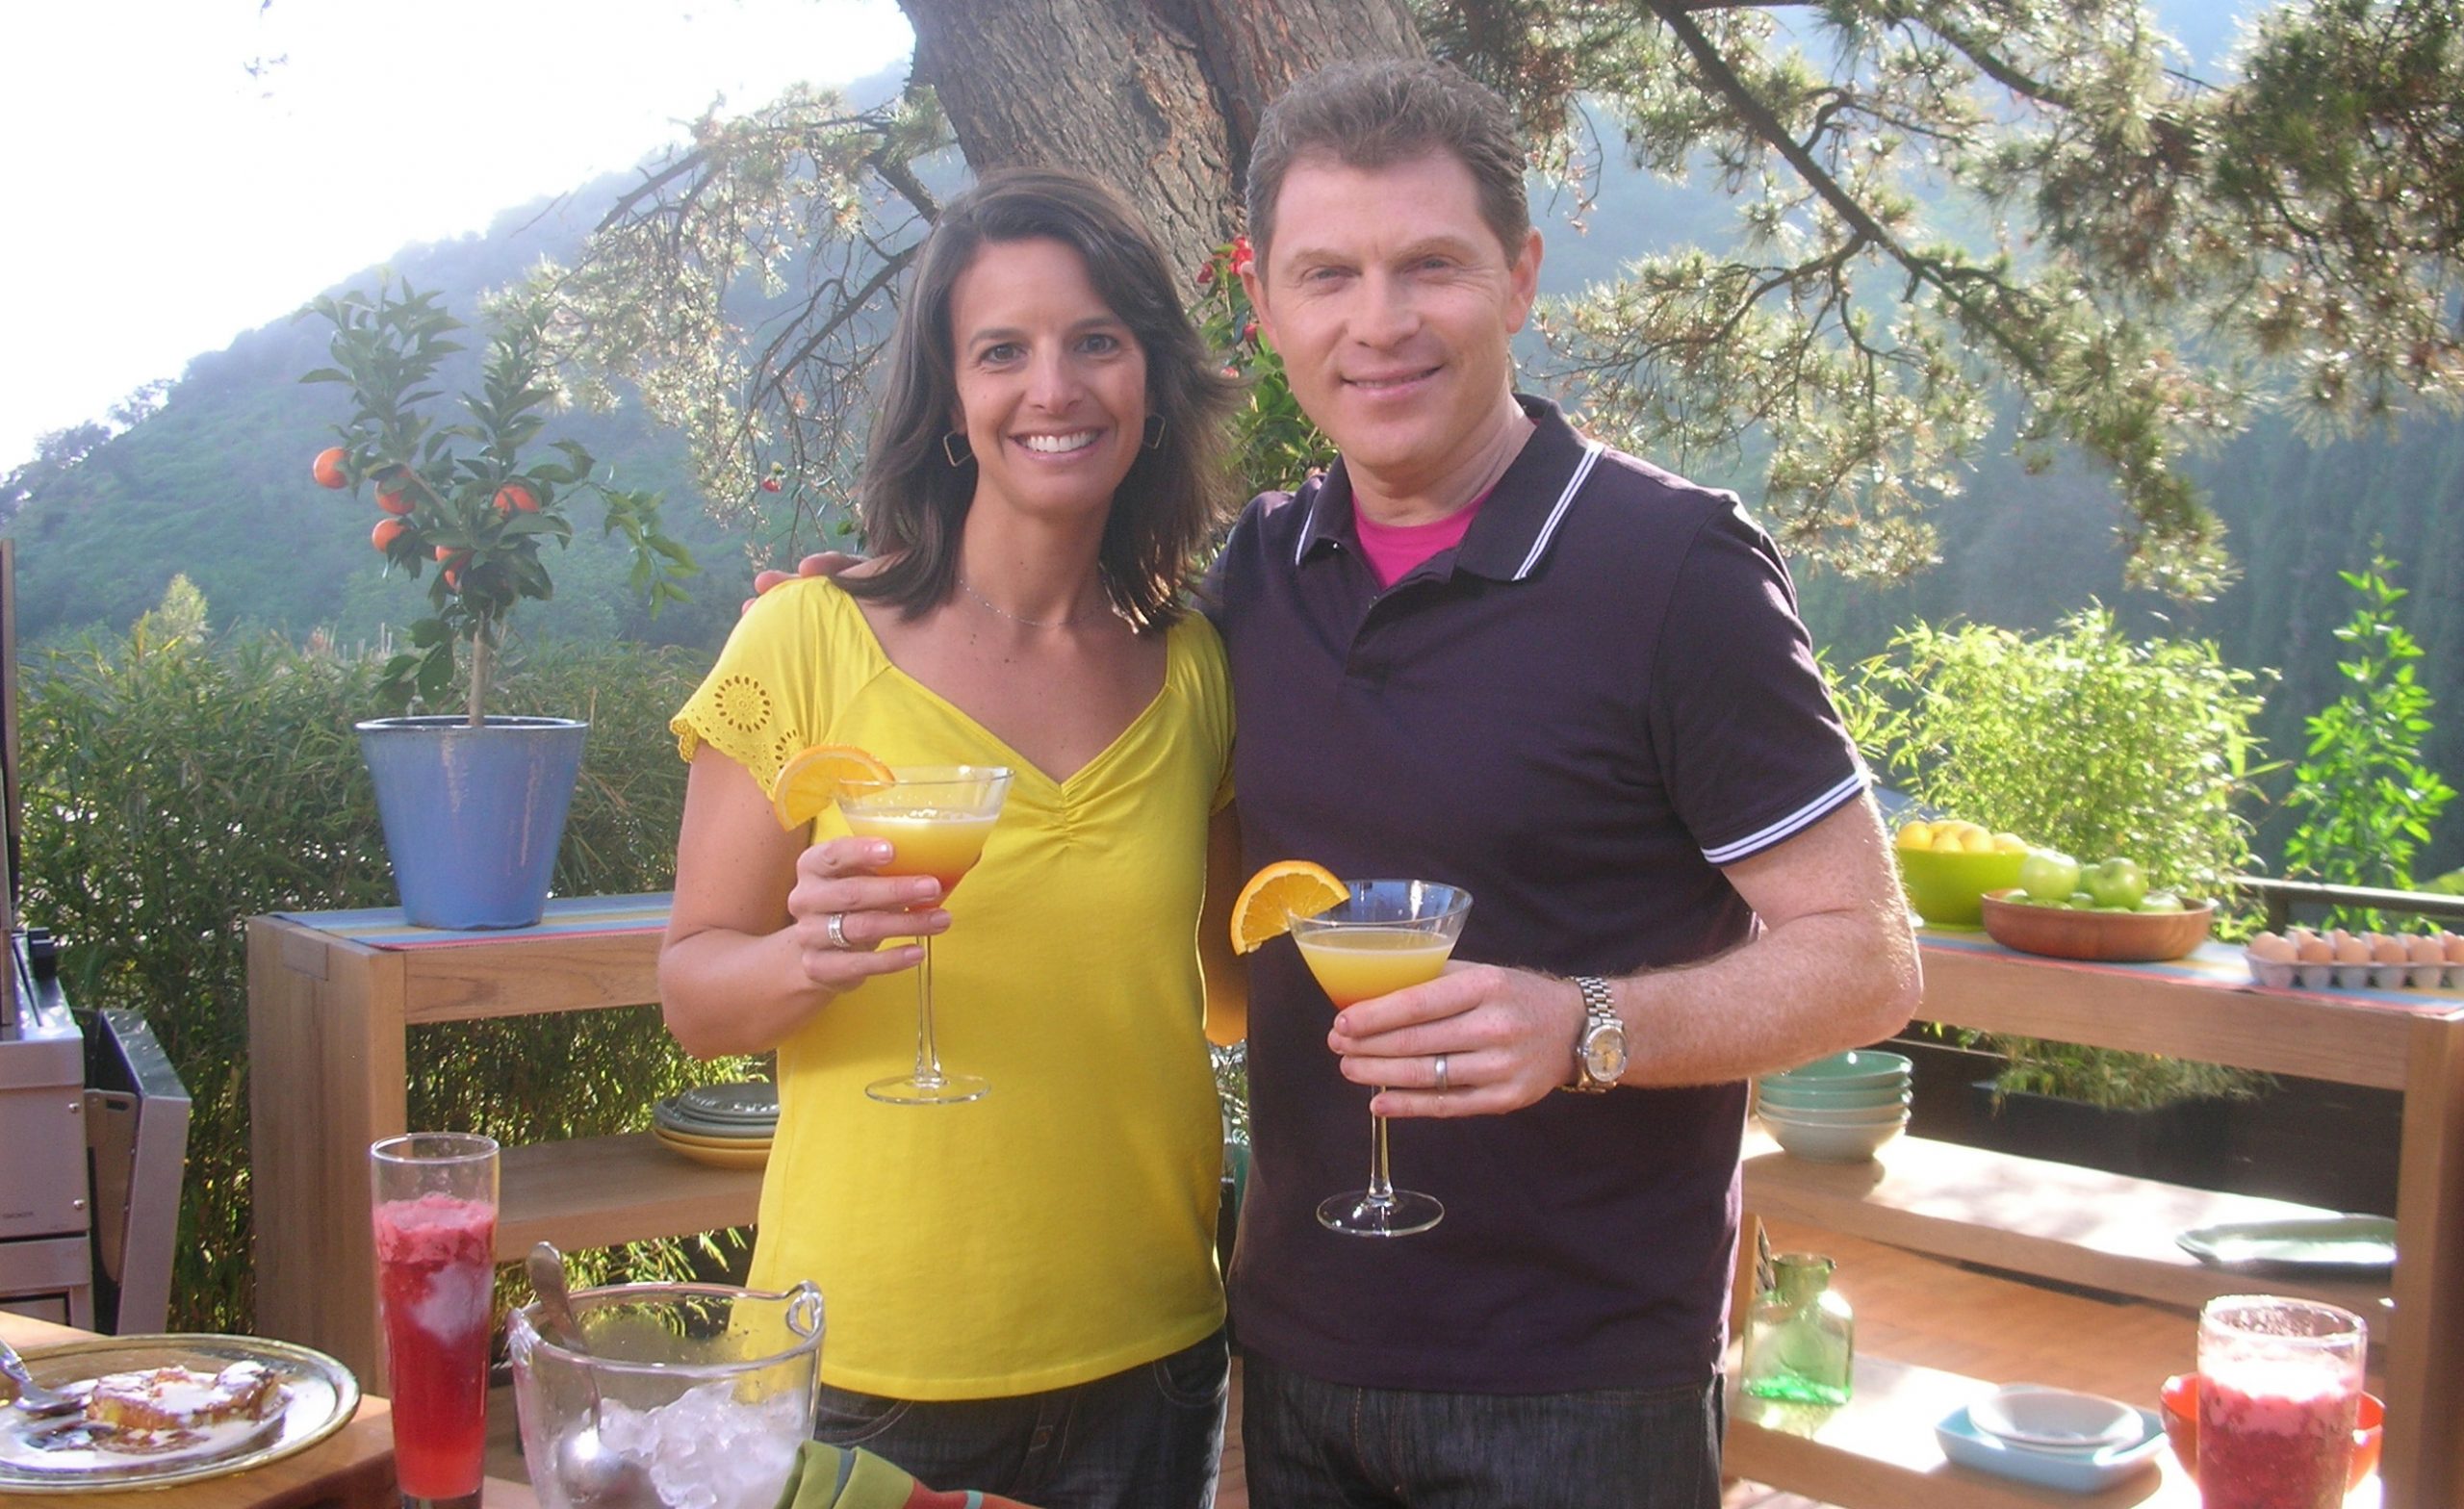 Andrea Atcheson with Bobby Flay